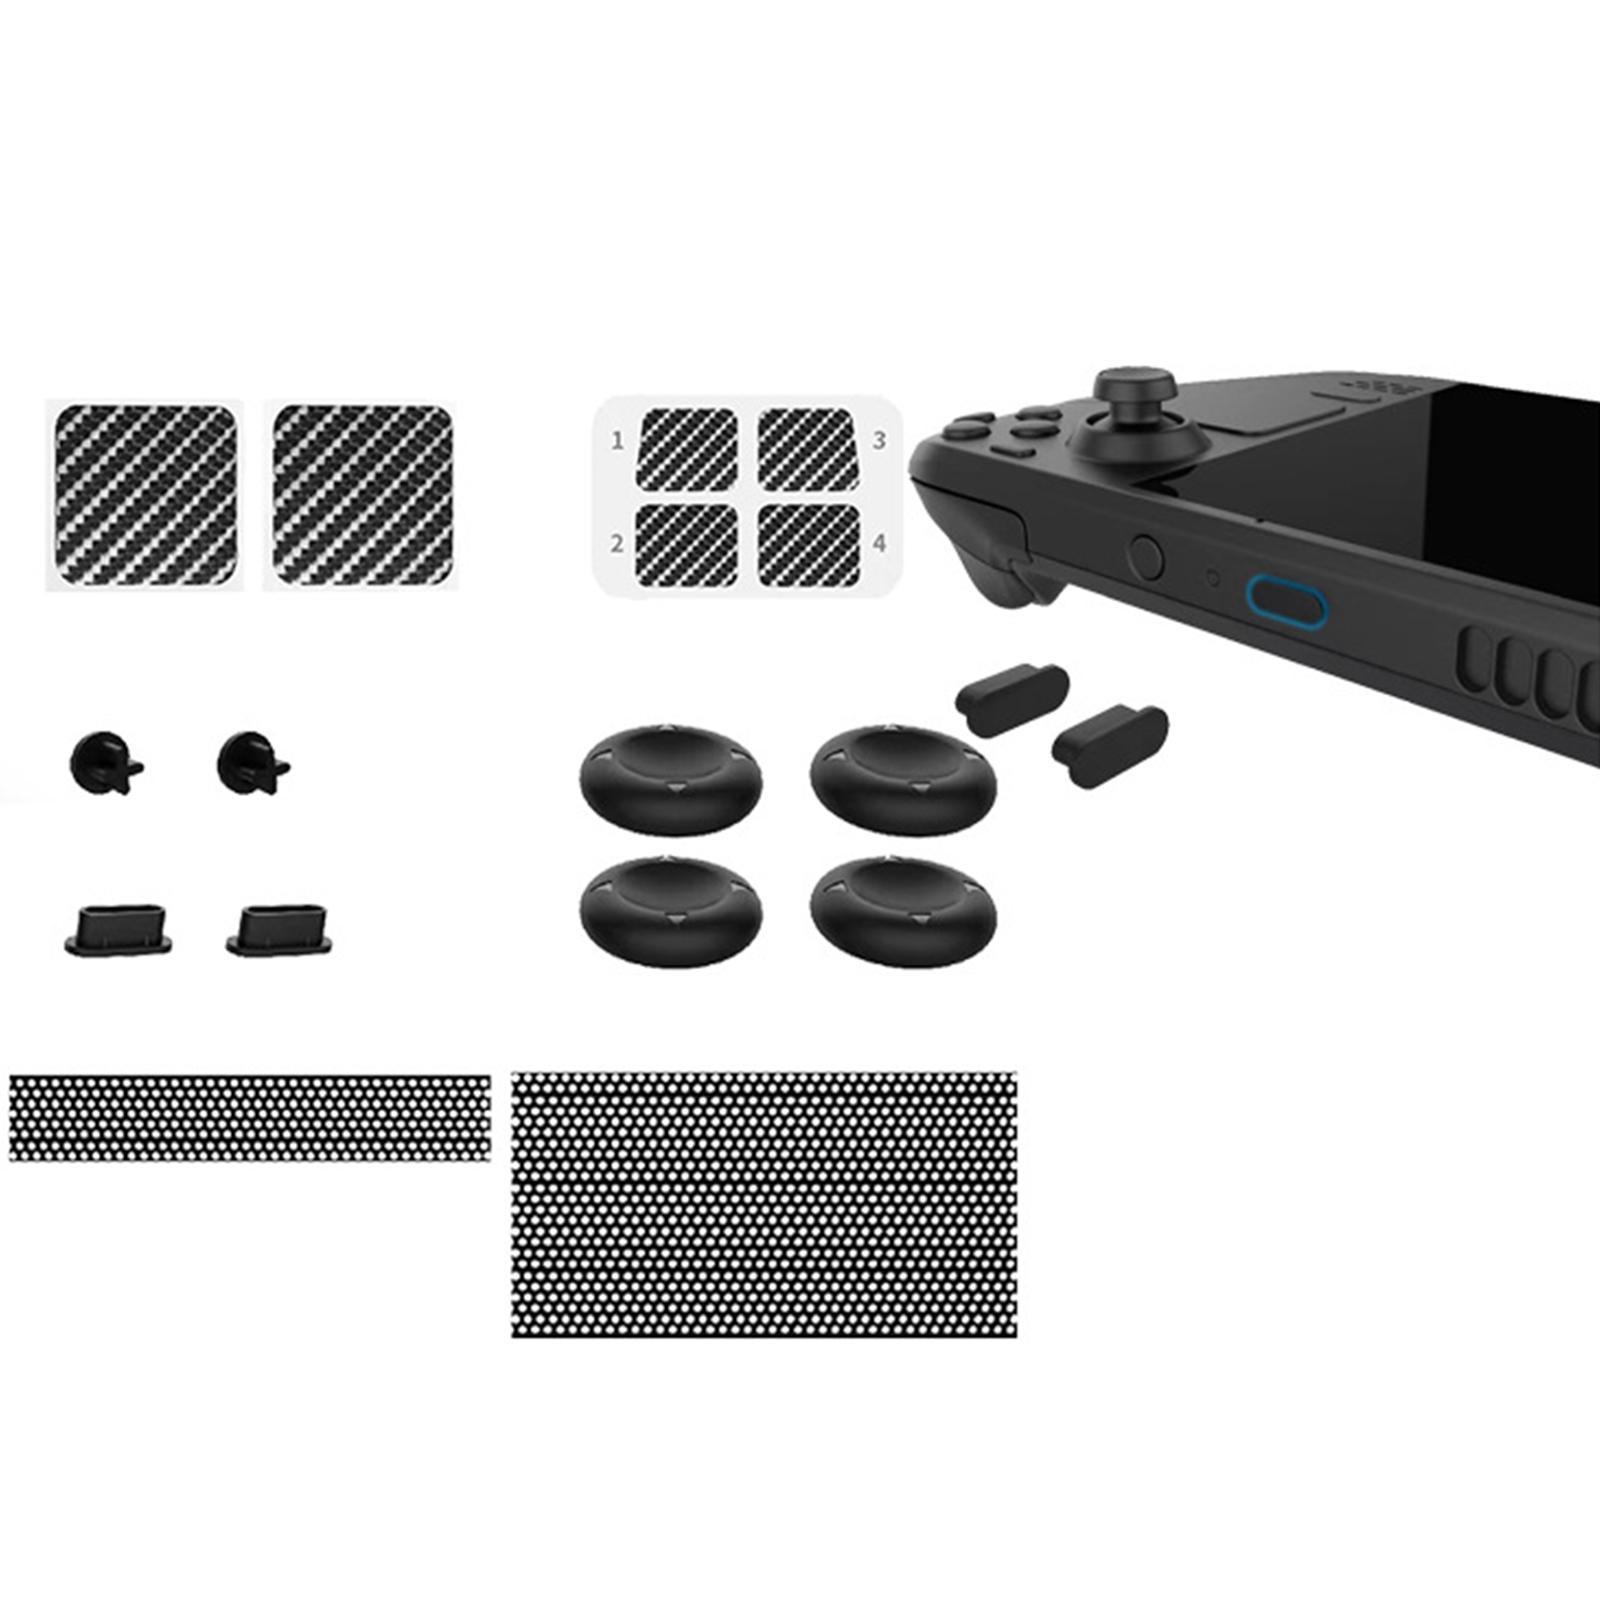 Gaming Console Protective Kits Joystick Caps for Accessories